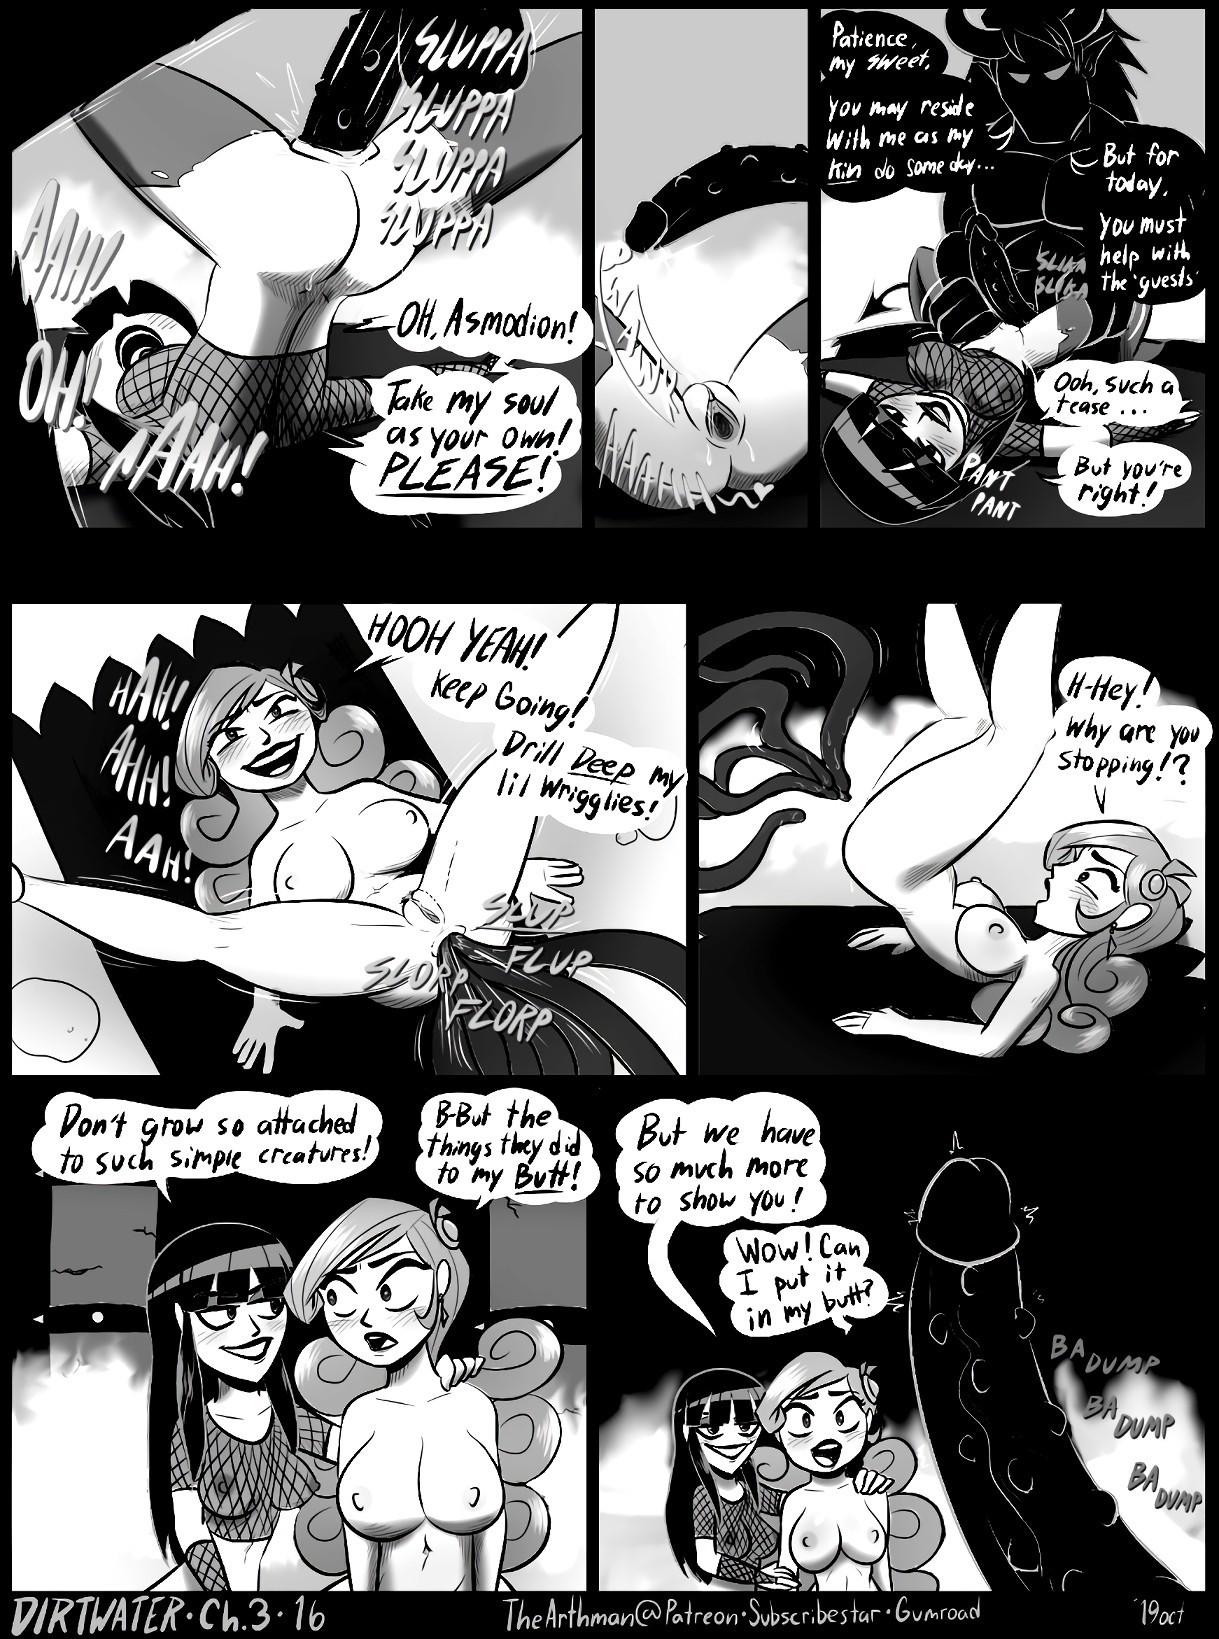 Dirtwater 3 - Dark Chambers porn comic picture 17